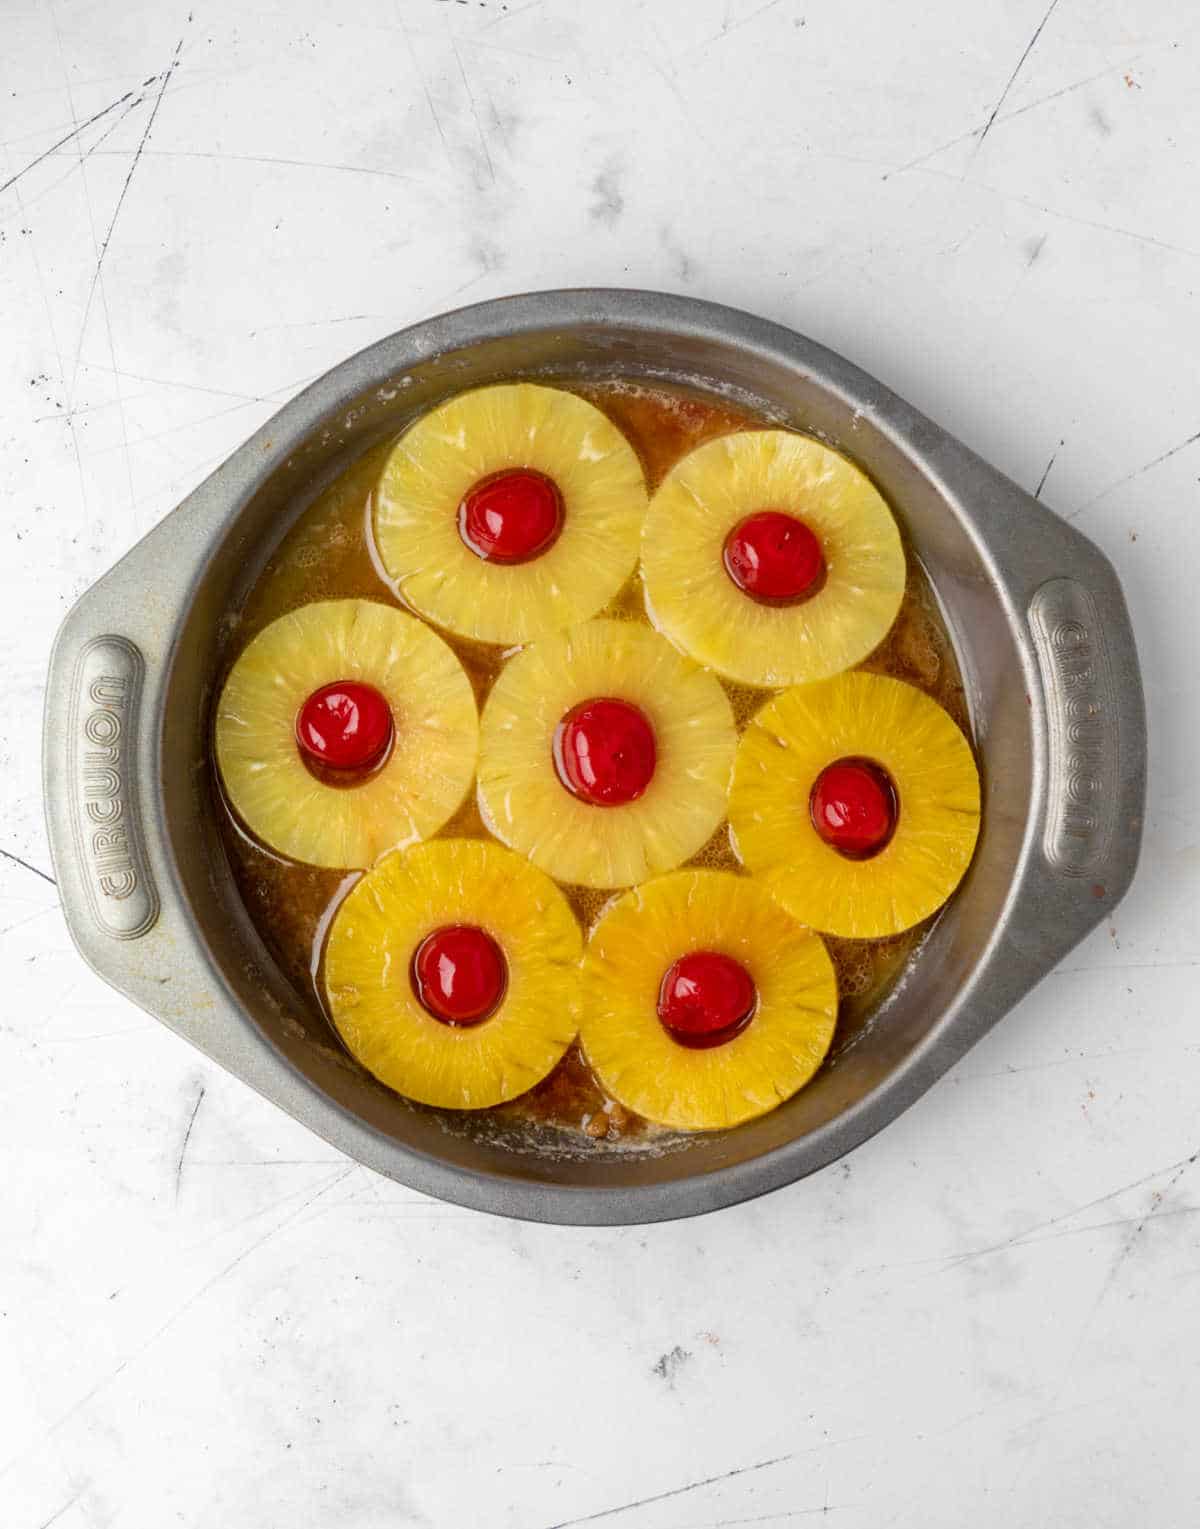 A pan with maraschino cherries in pineapple slices. 